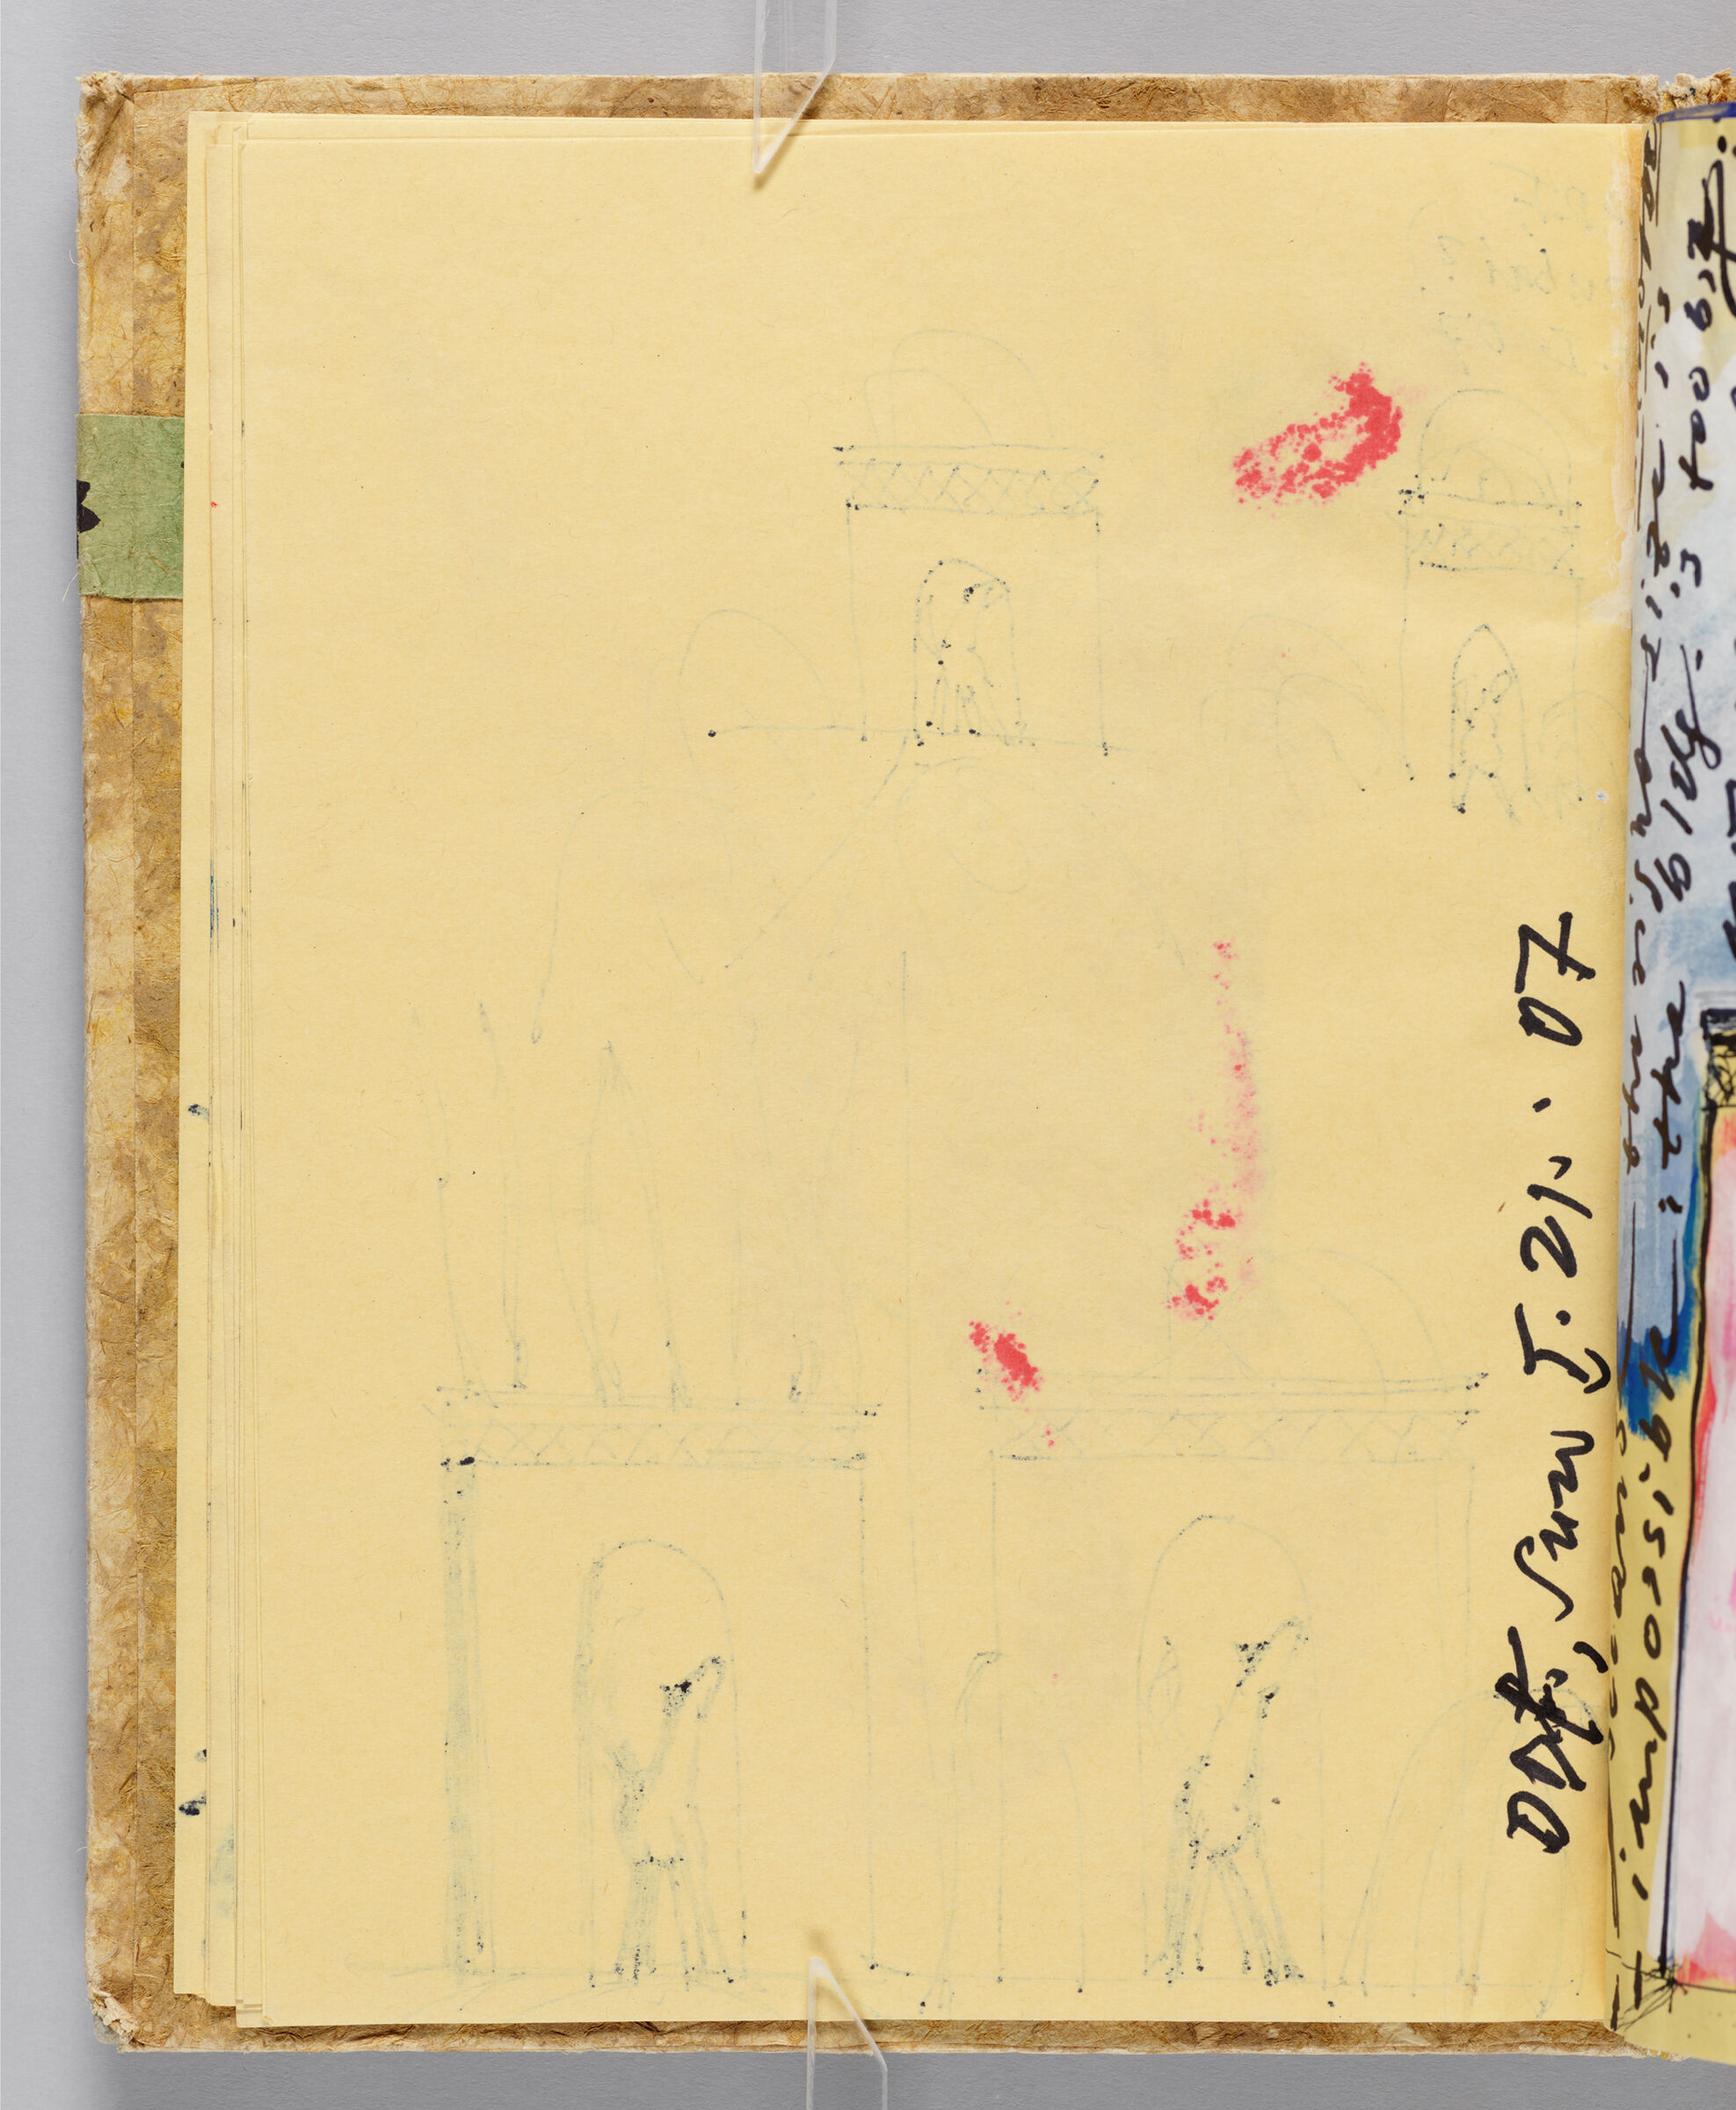 Untitled (Bleed-Through Of Previous Page With Text, Left Page); Untitled (Horse Under Arch, Right Page)